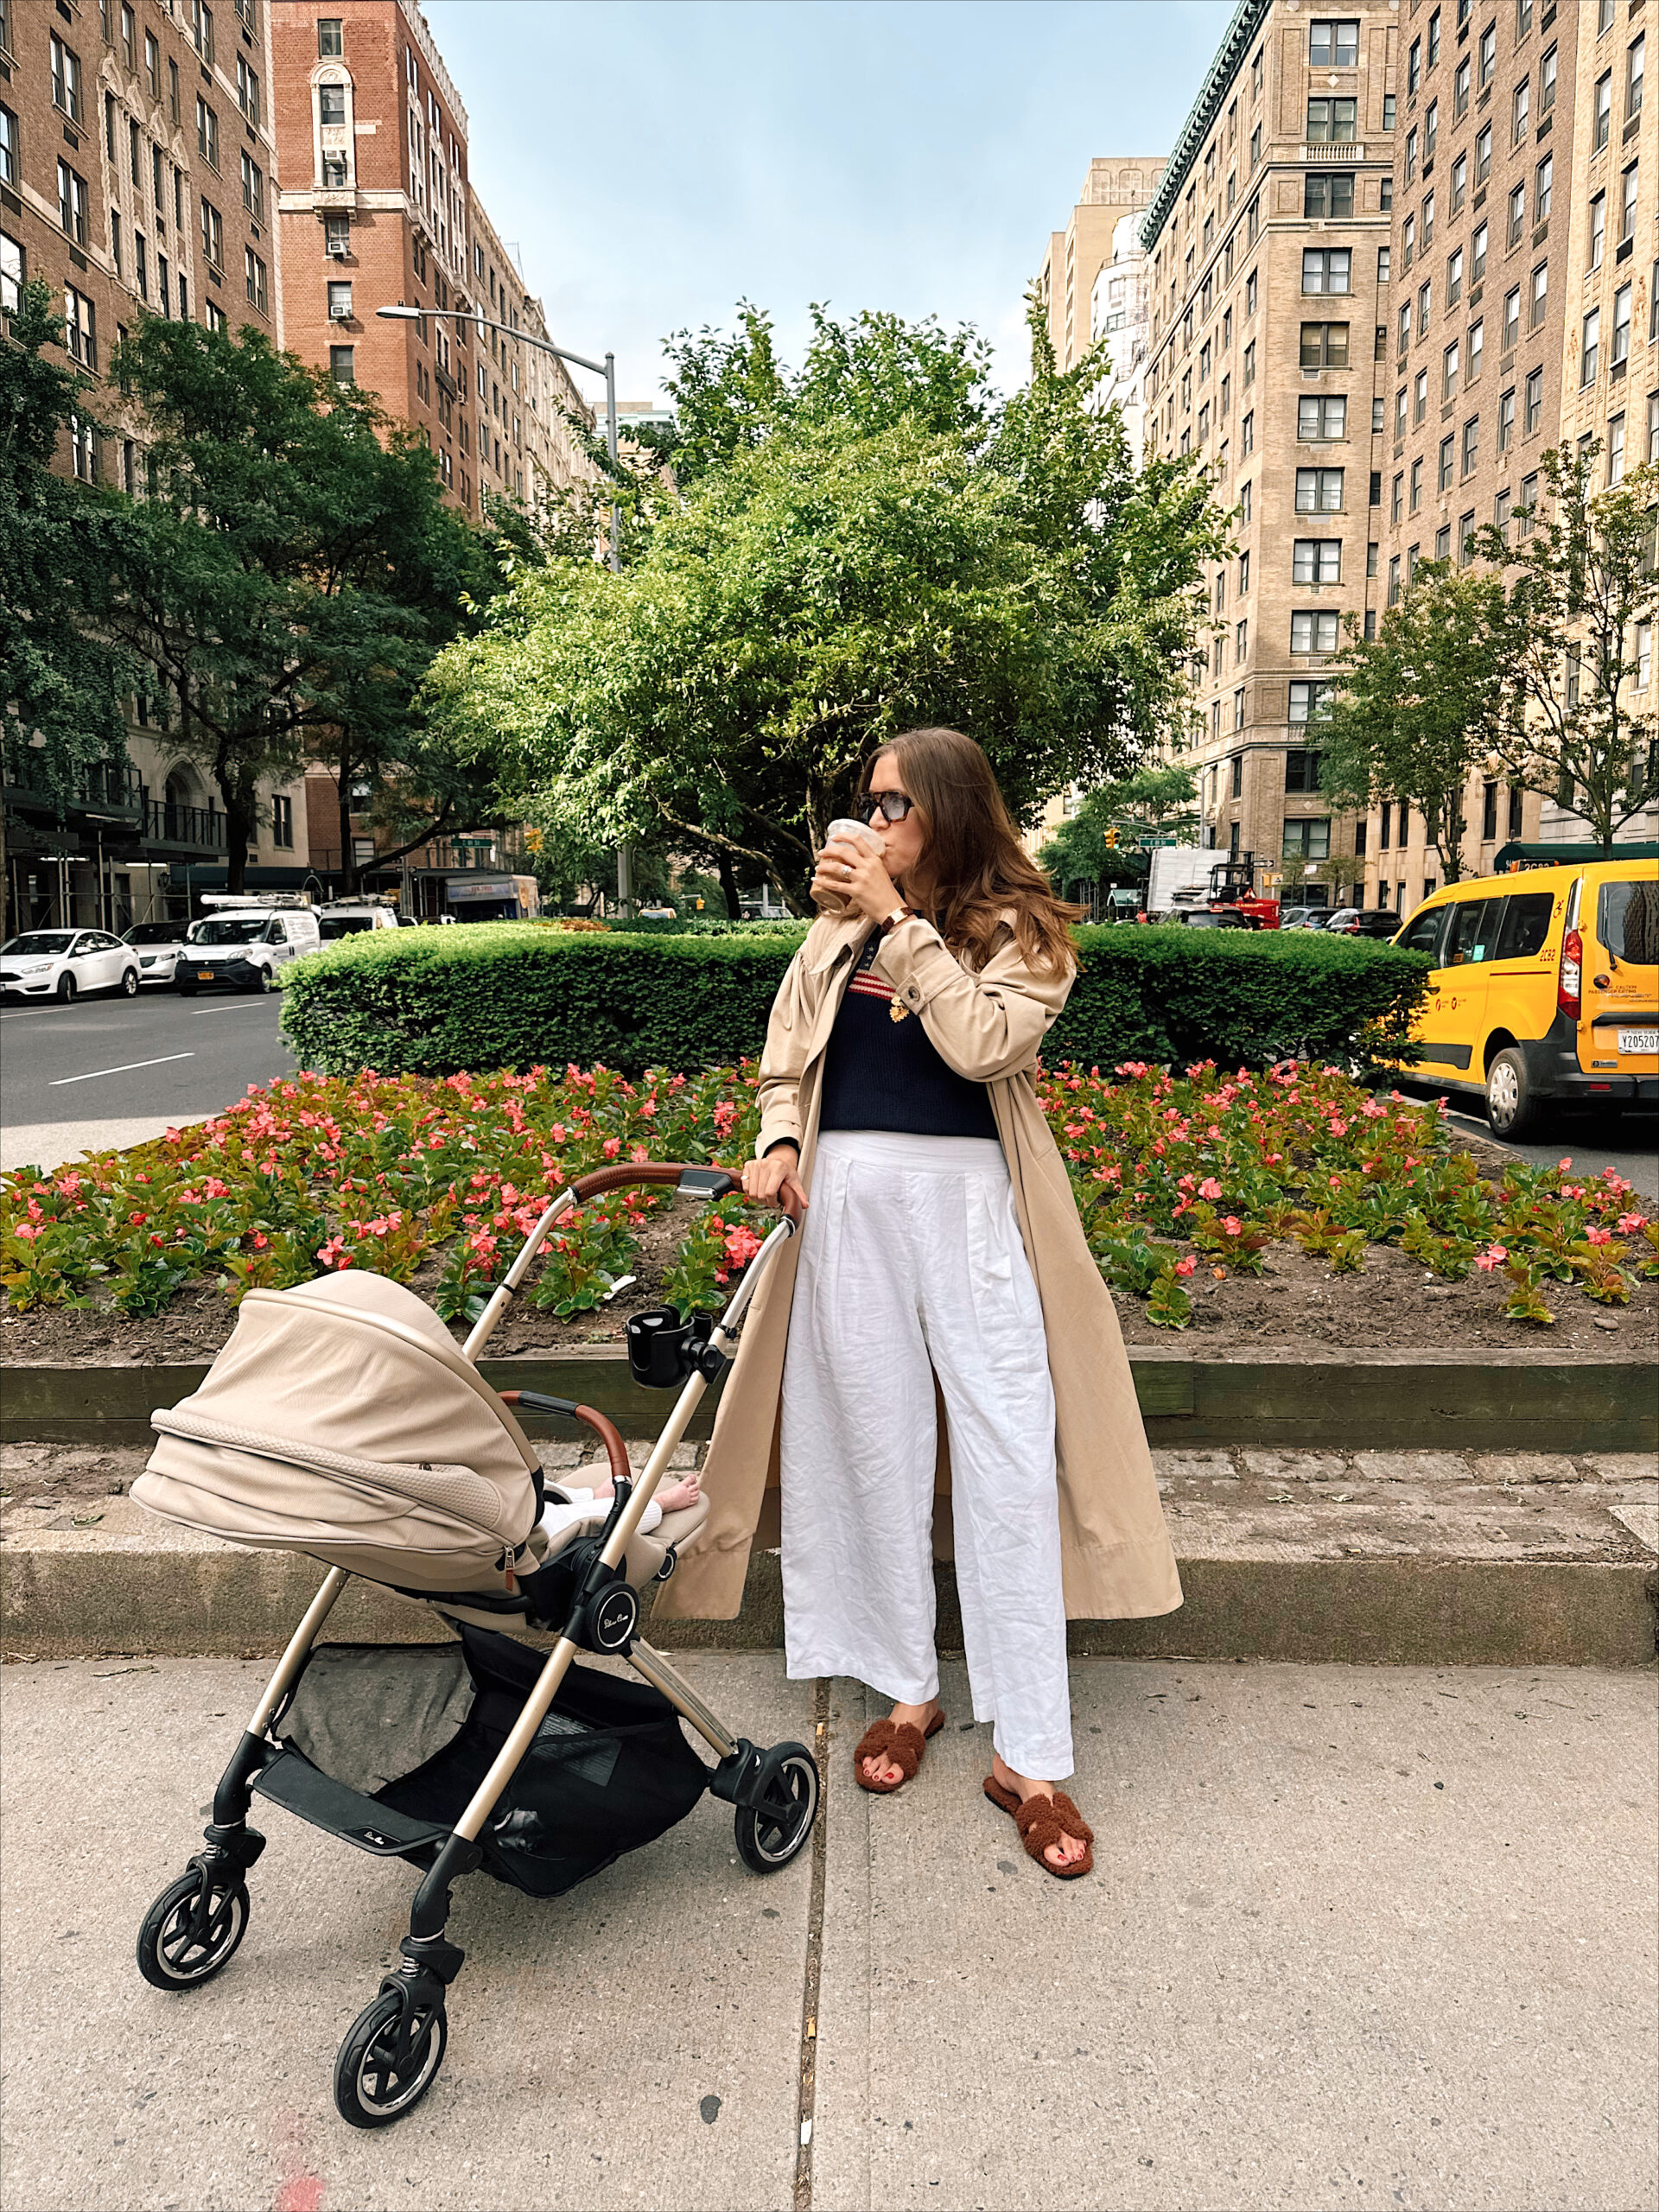 Anna Page on Park Avenue on a spring day with her baby in a stroller and coffee in hand as taxis drive past in the background.